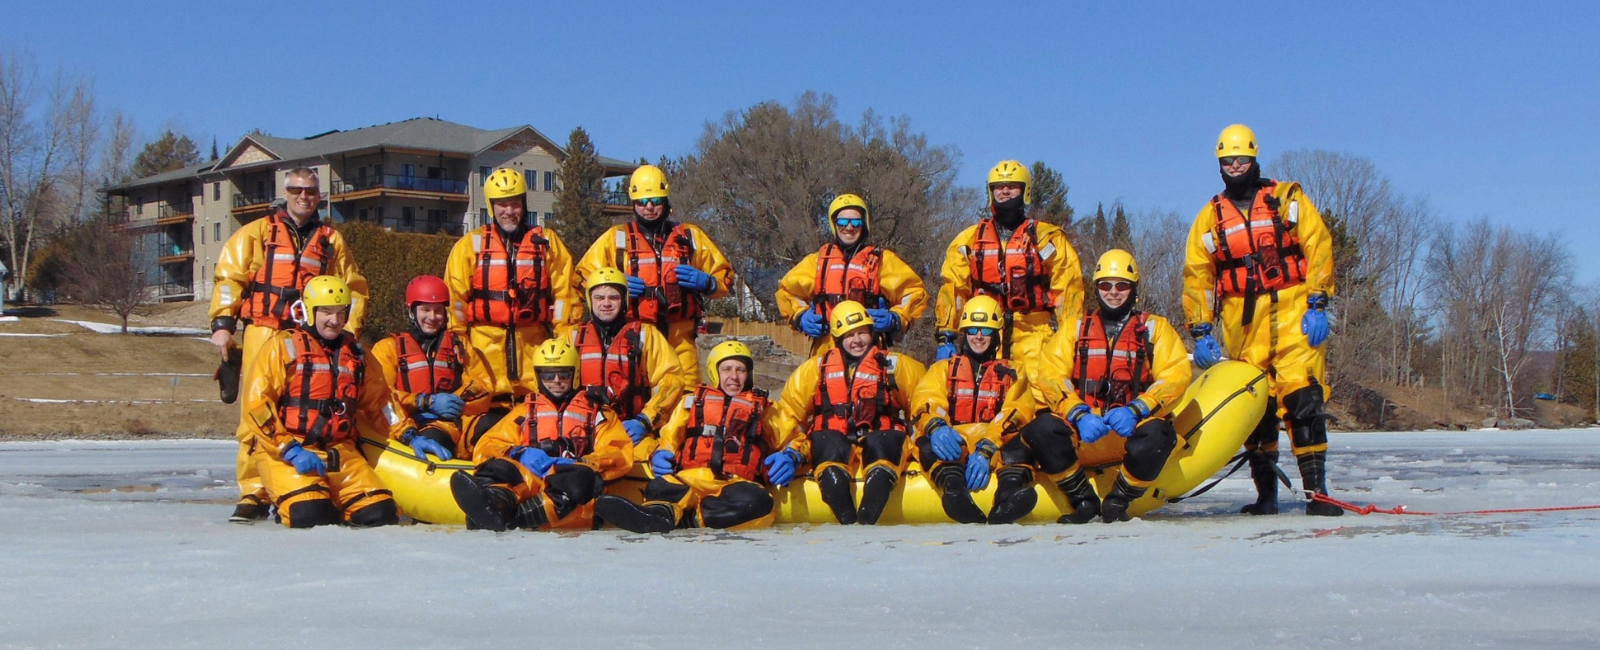 14 Members of the Dysart Fire Department Practicing Ice Safety Training